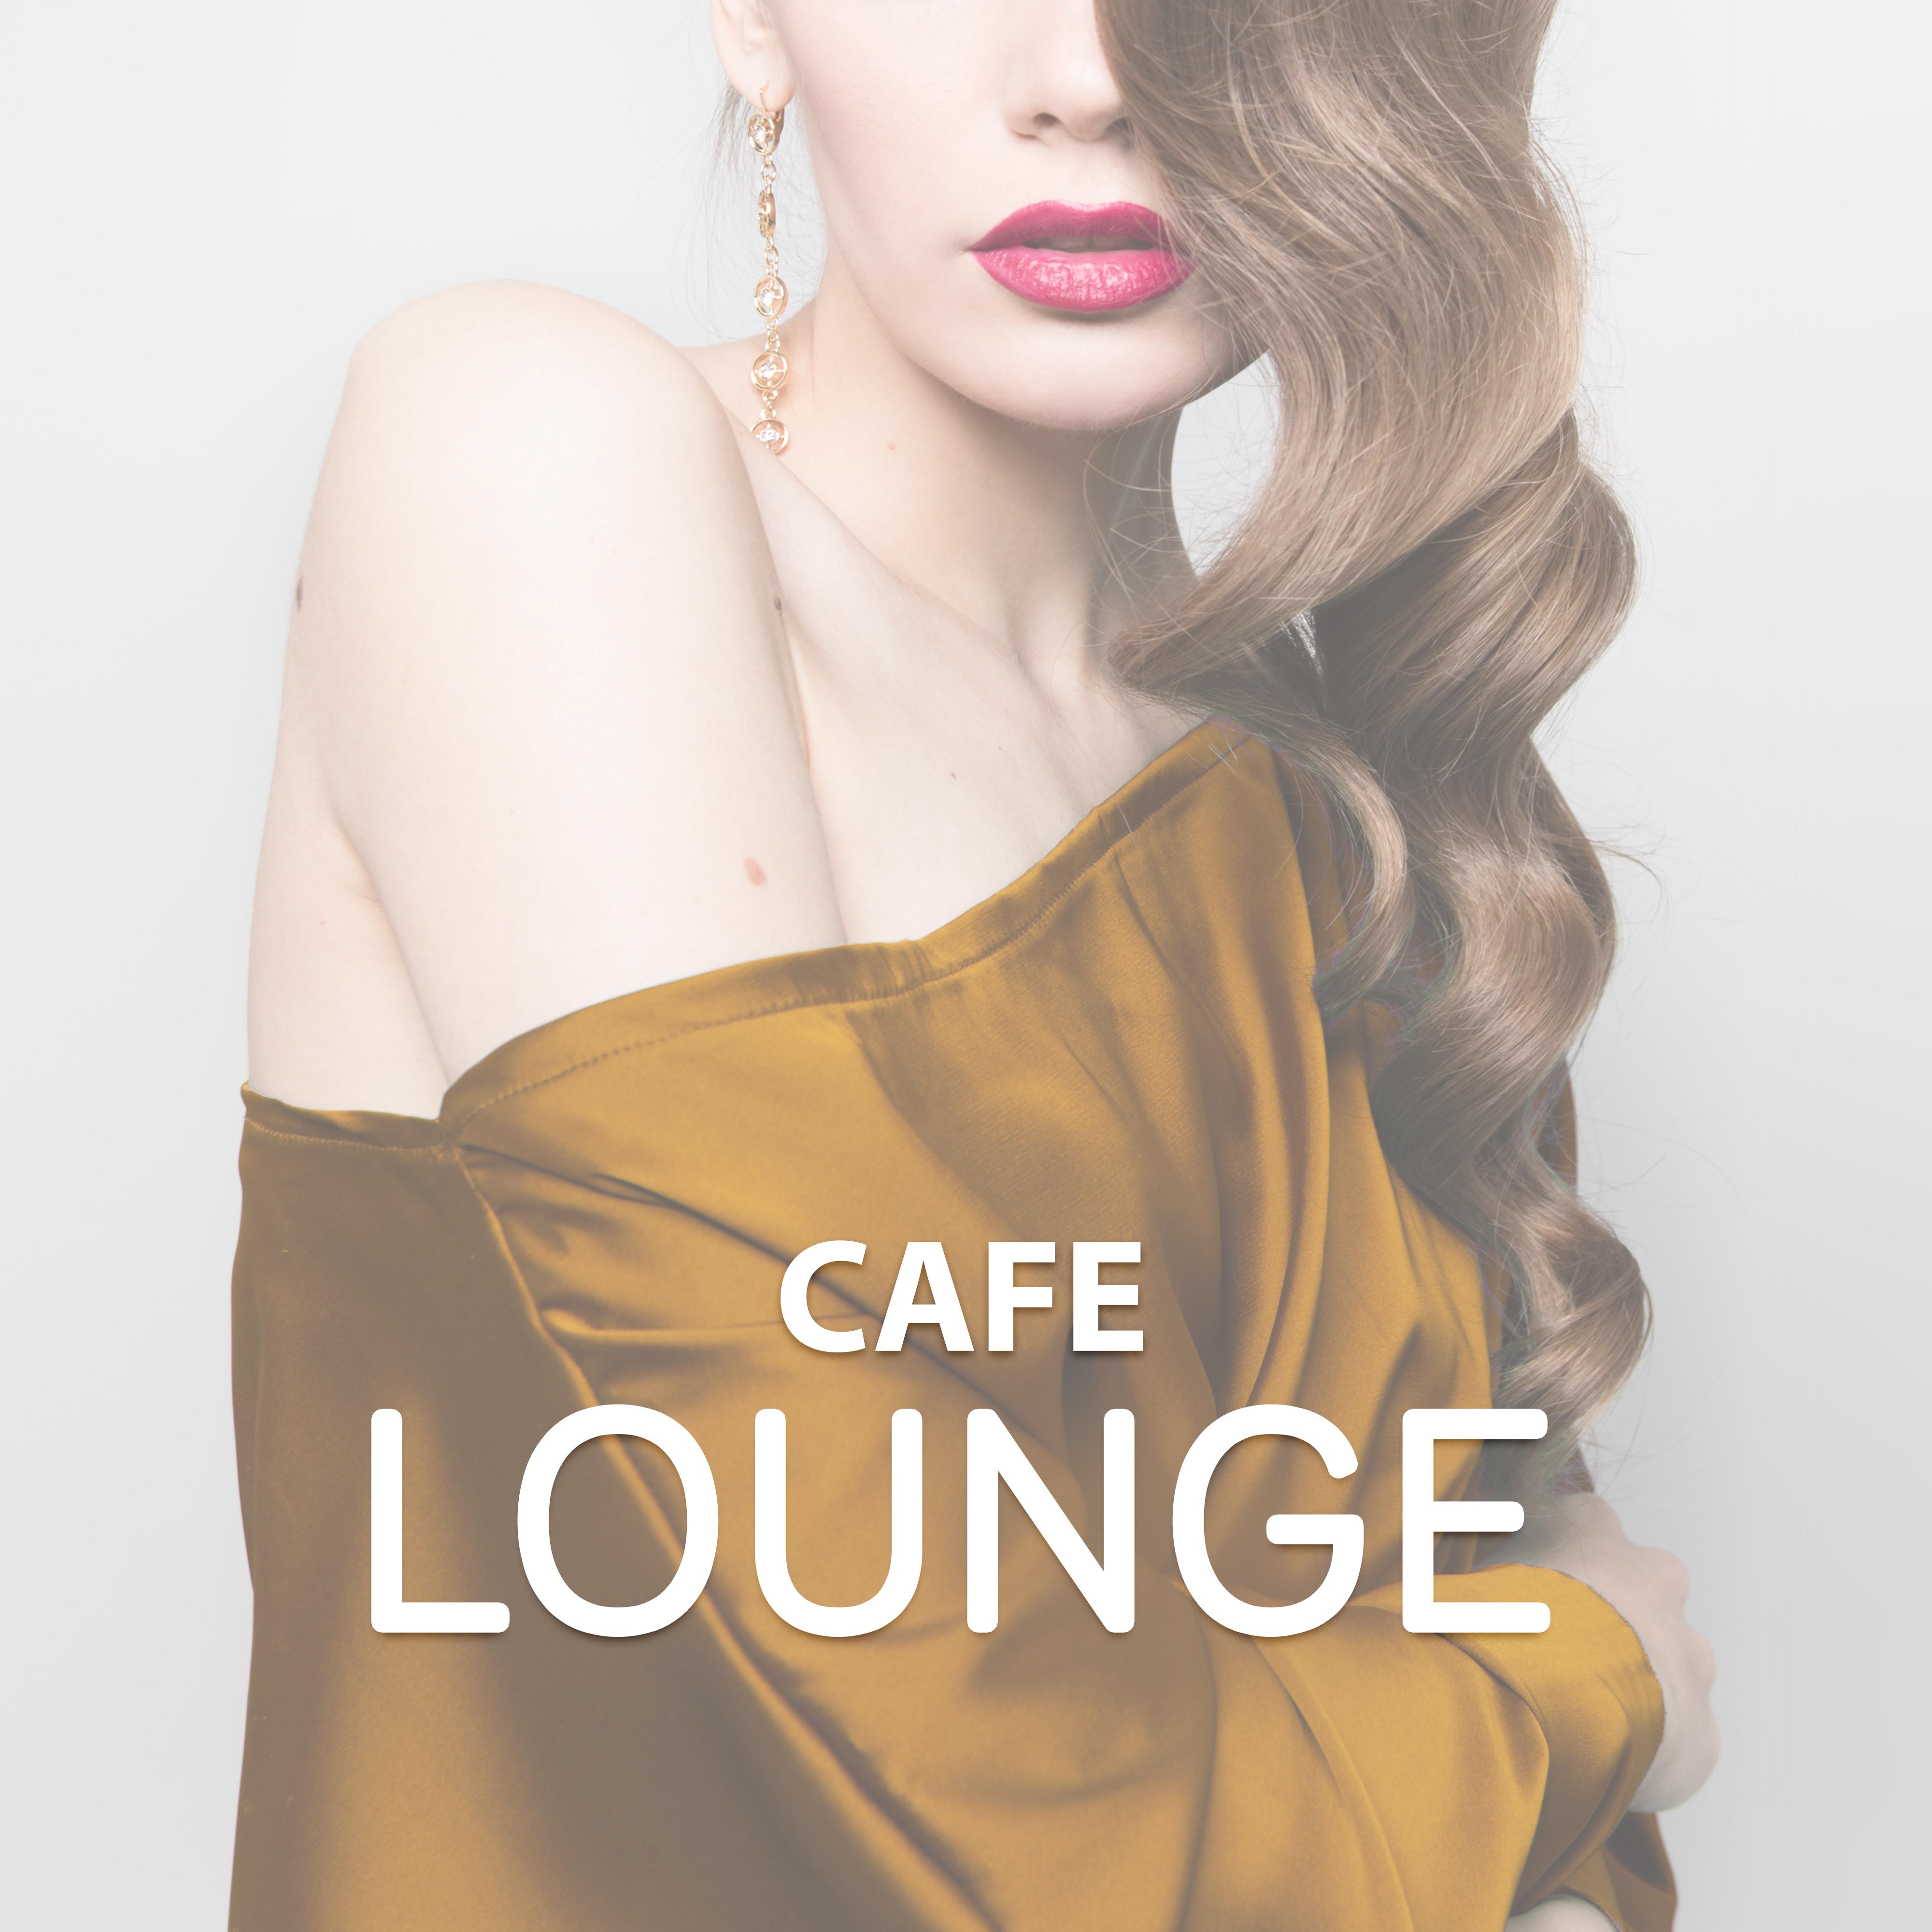 Cafe Lounge – Best Chill Out Music to Relax, Ibiza Lounge, Stress Free, Coffee Time, Chill a Bit